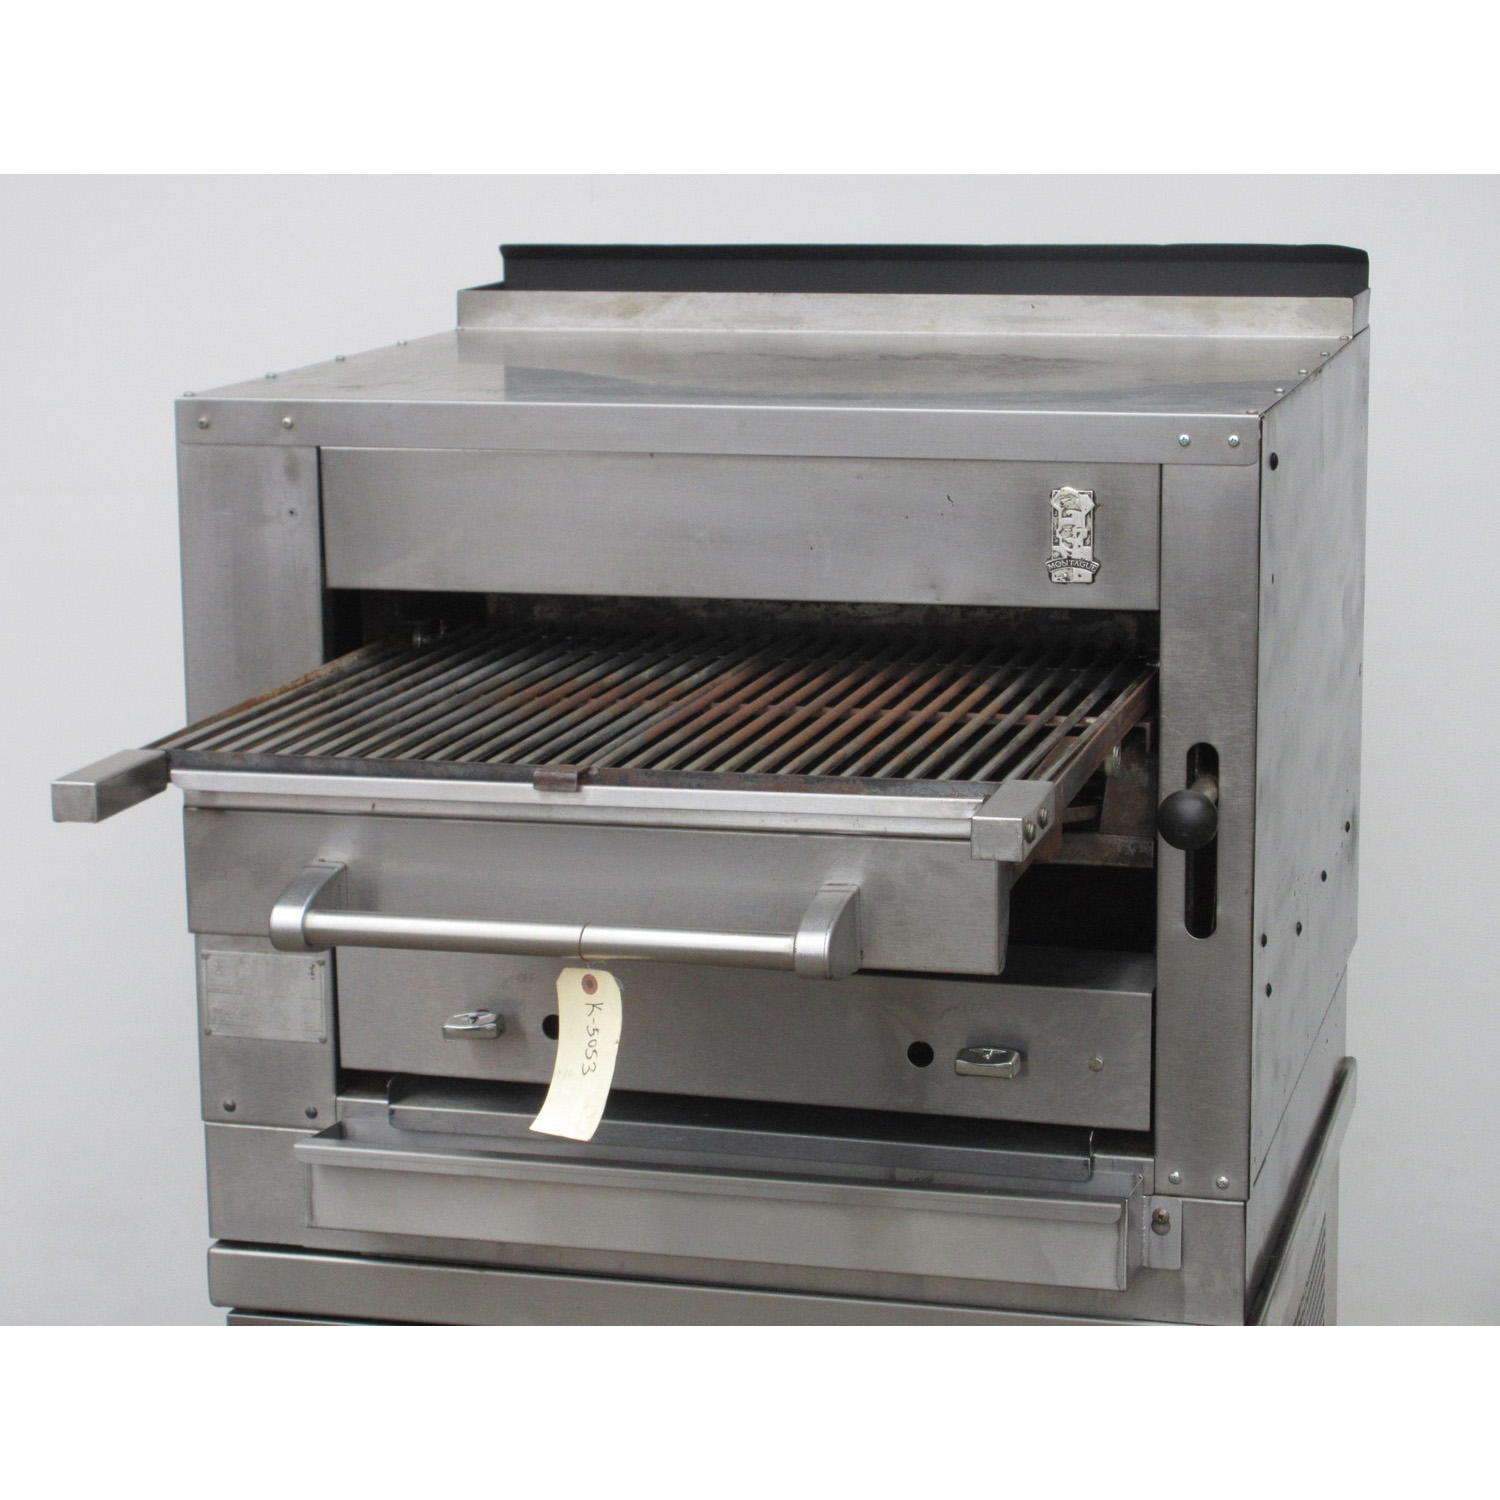 Montague C36 Broiler On True Refrigerated Chef Base, Used Excellent Condition image 2